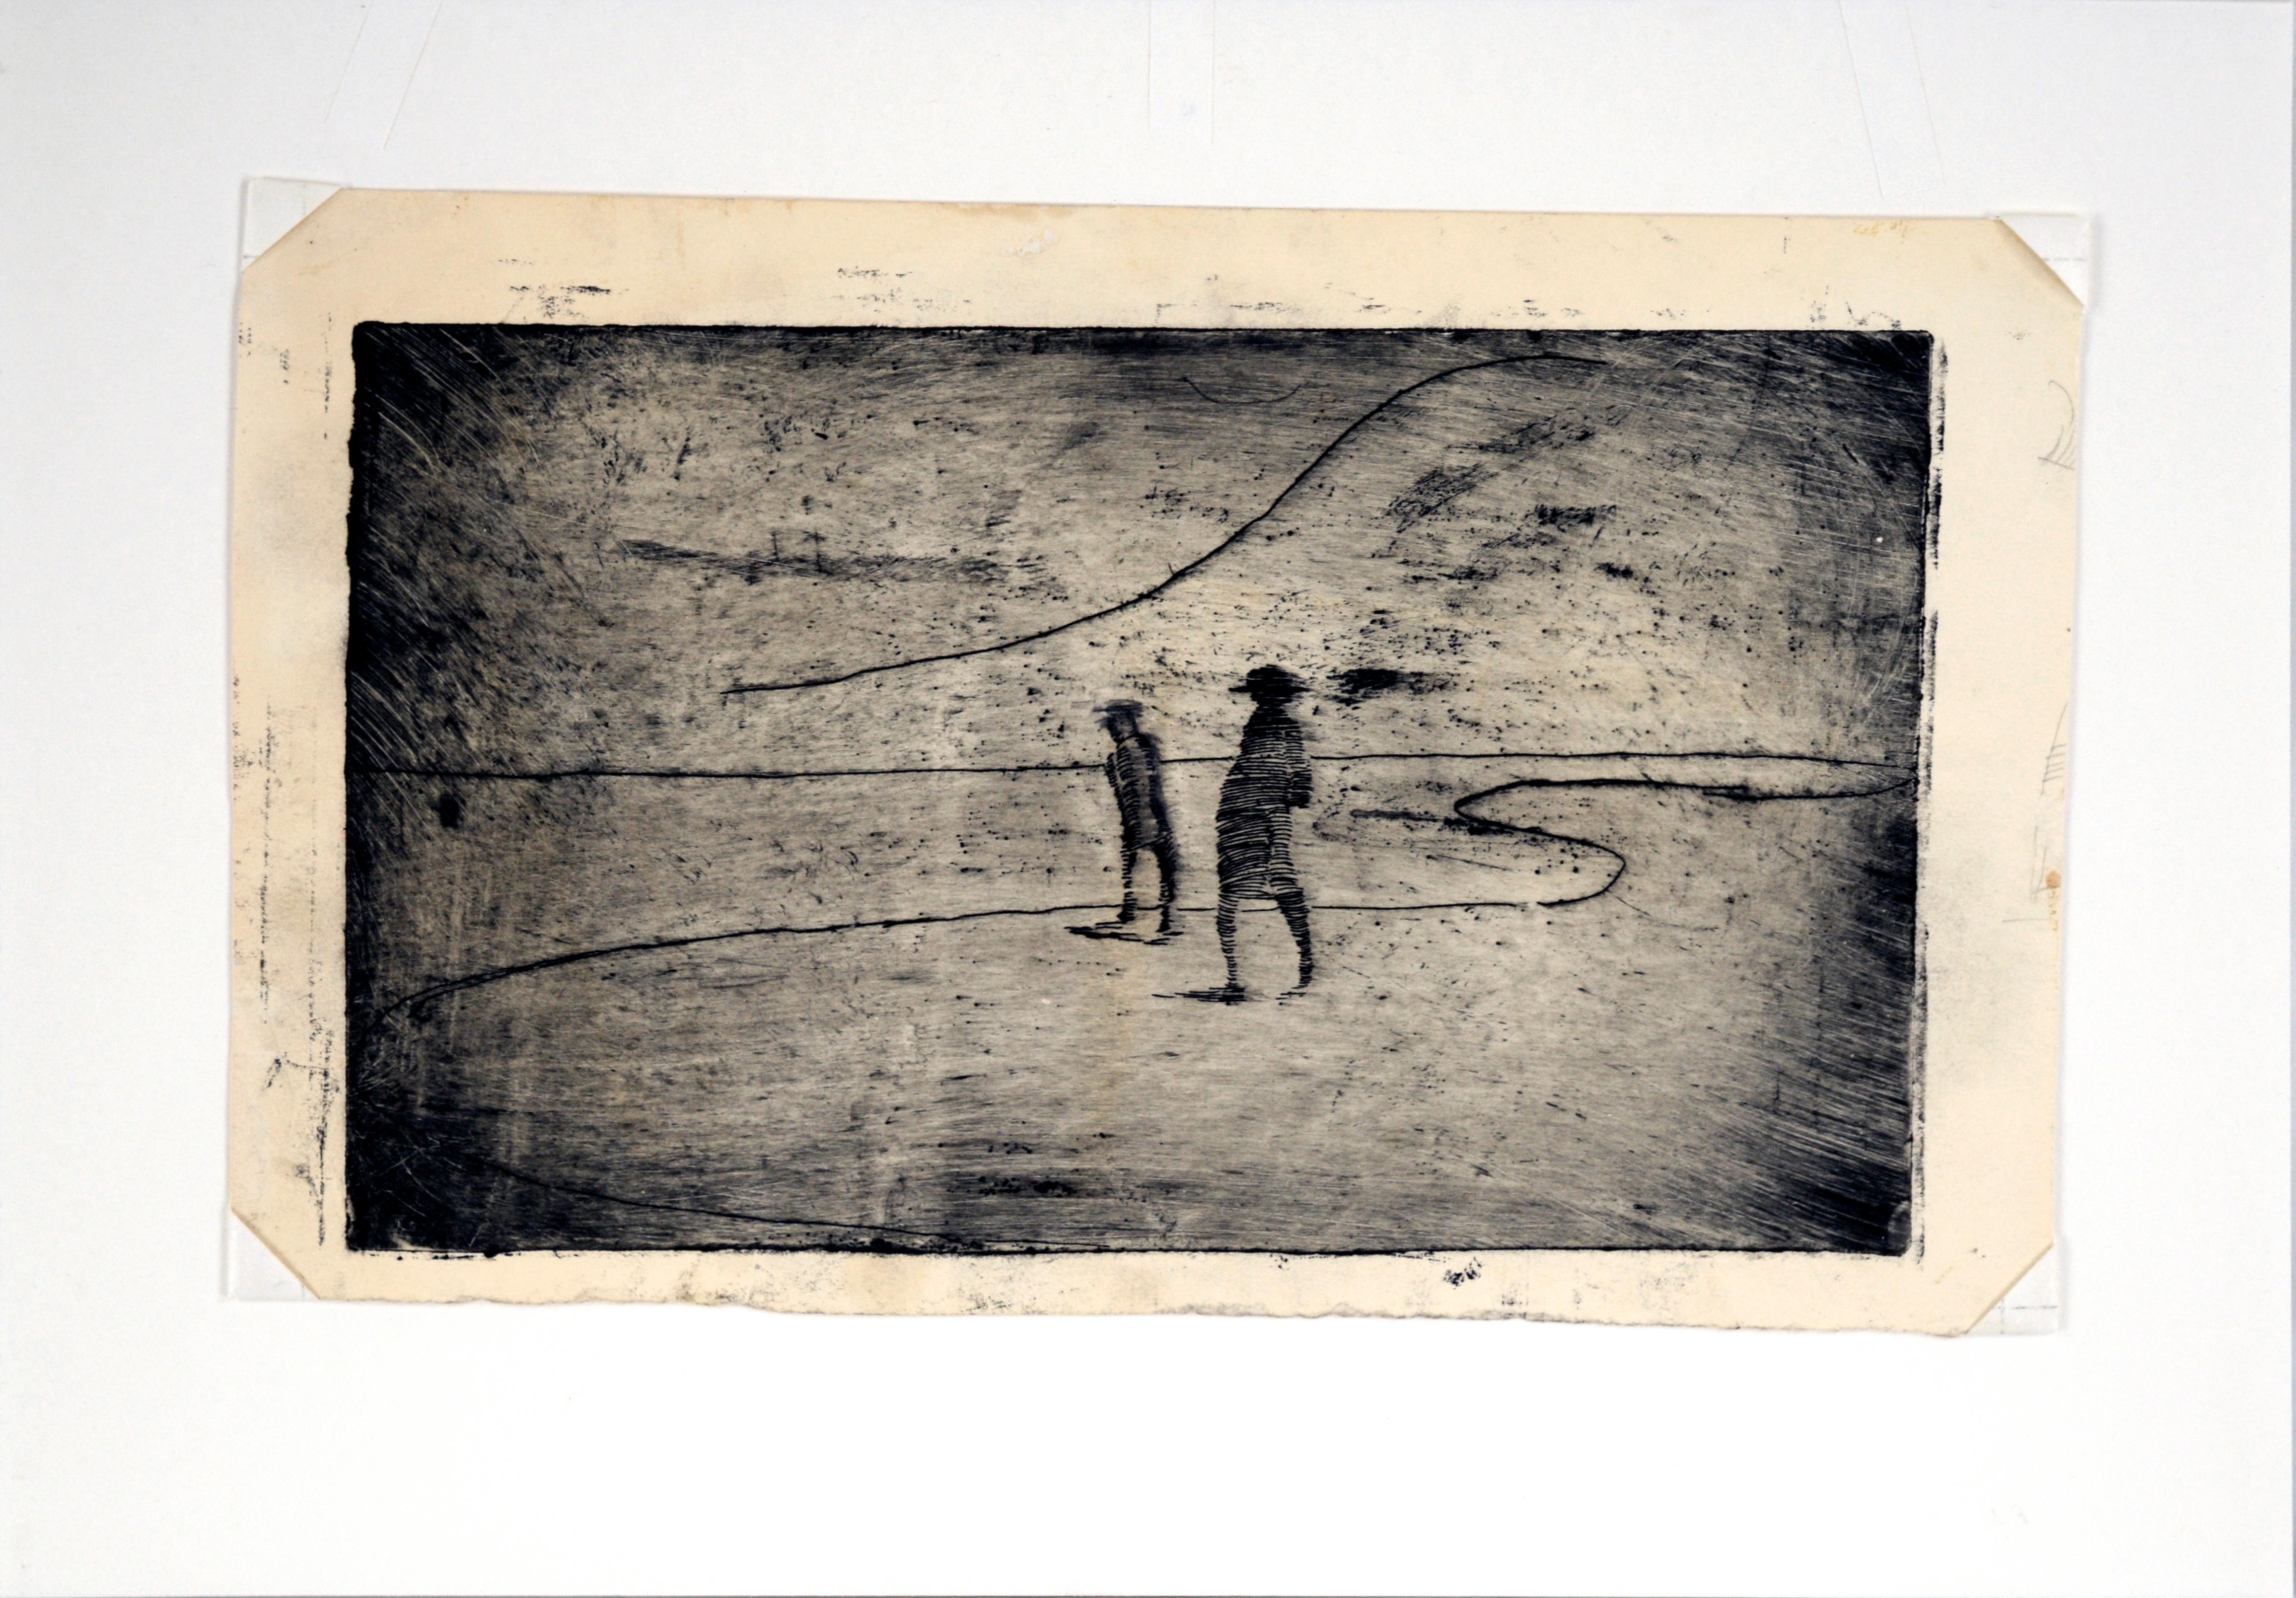 Two Figures on the Shore - Minimalist Landscape Drypoint Etching in Ink on Paper For Sale 1